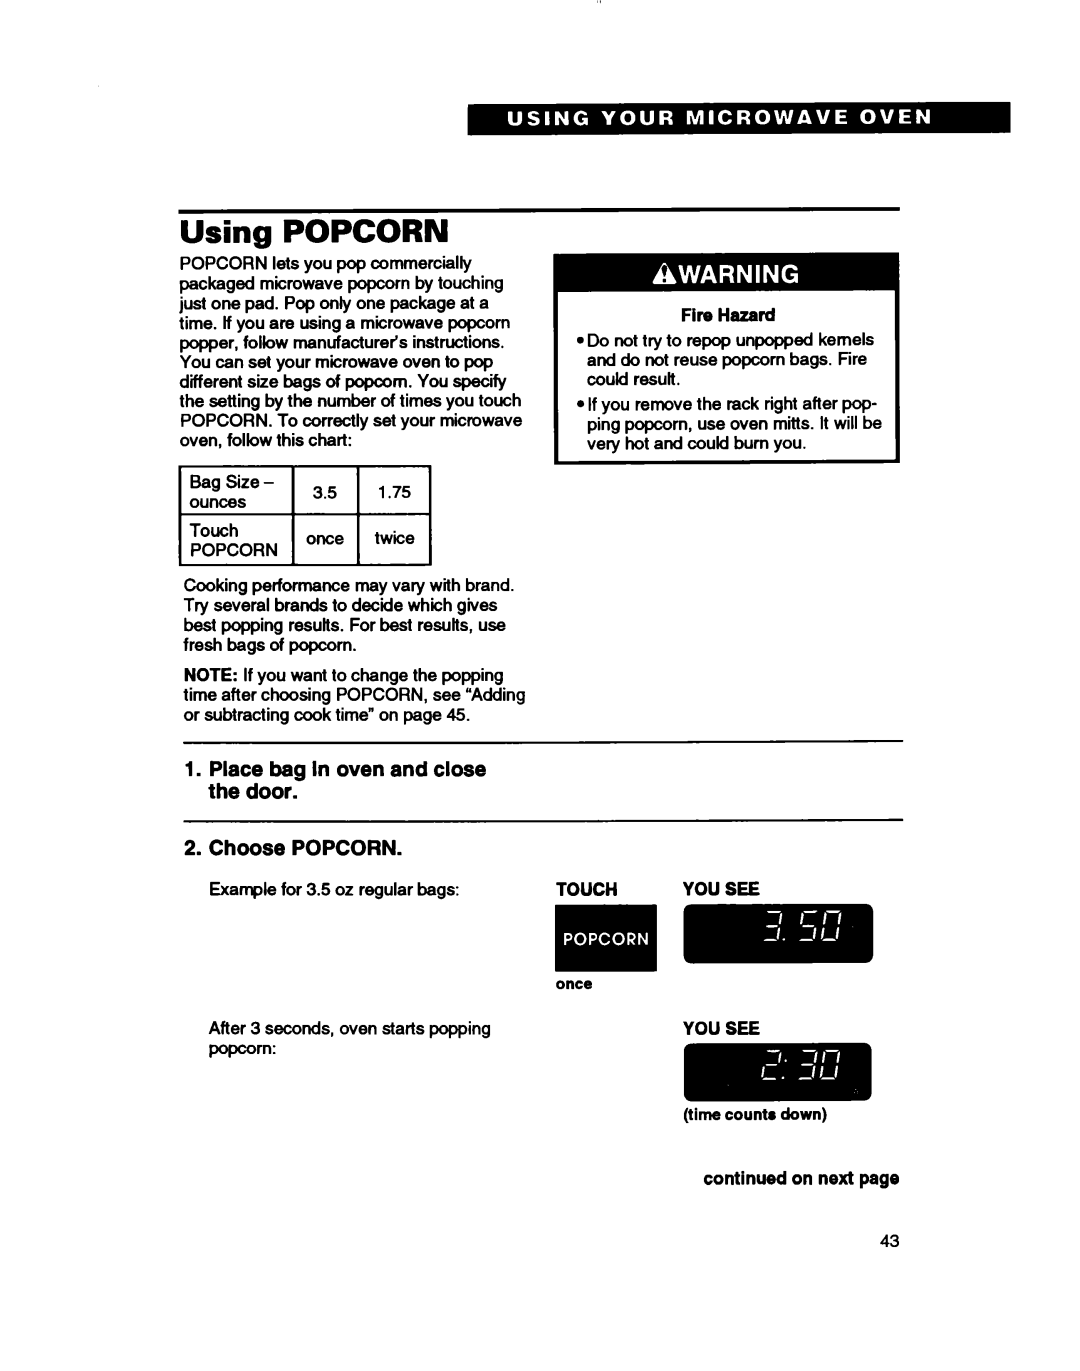 Whirlpool MH7110XB warranty Using POPCORN, Place bag In oven and close the door, Choose POPCORN 